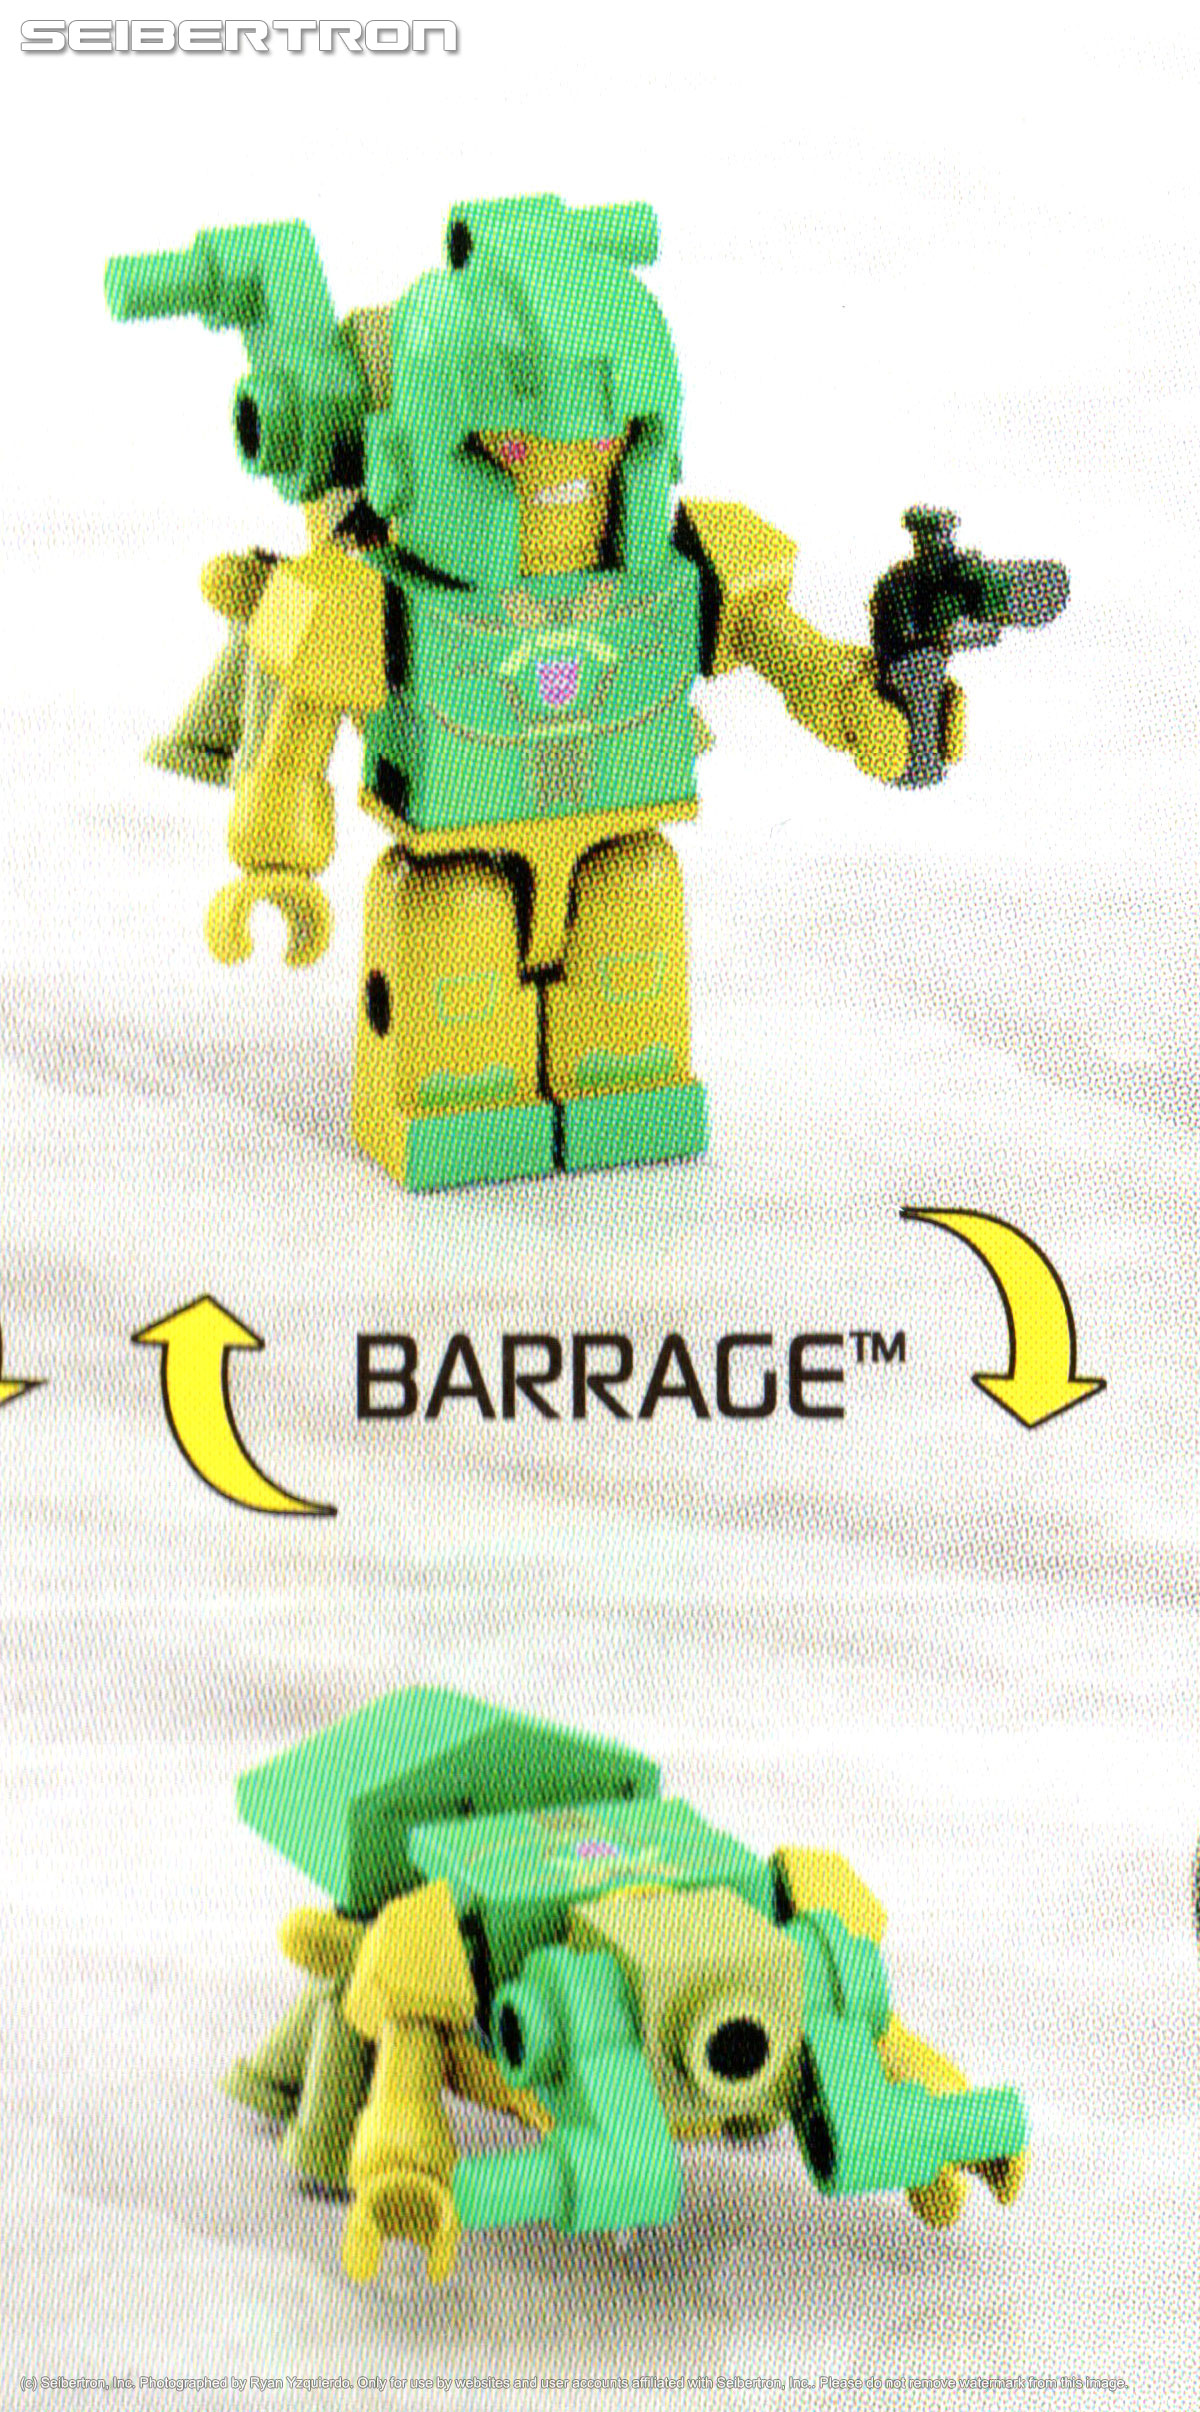 Transformers listings from Seibertron.com: BARRAGE Transformers Kre-o Micro-Changers Series 4 34 Kreon G1 Insecticon New